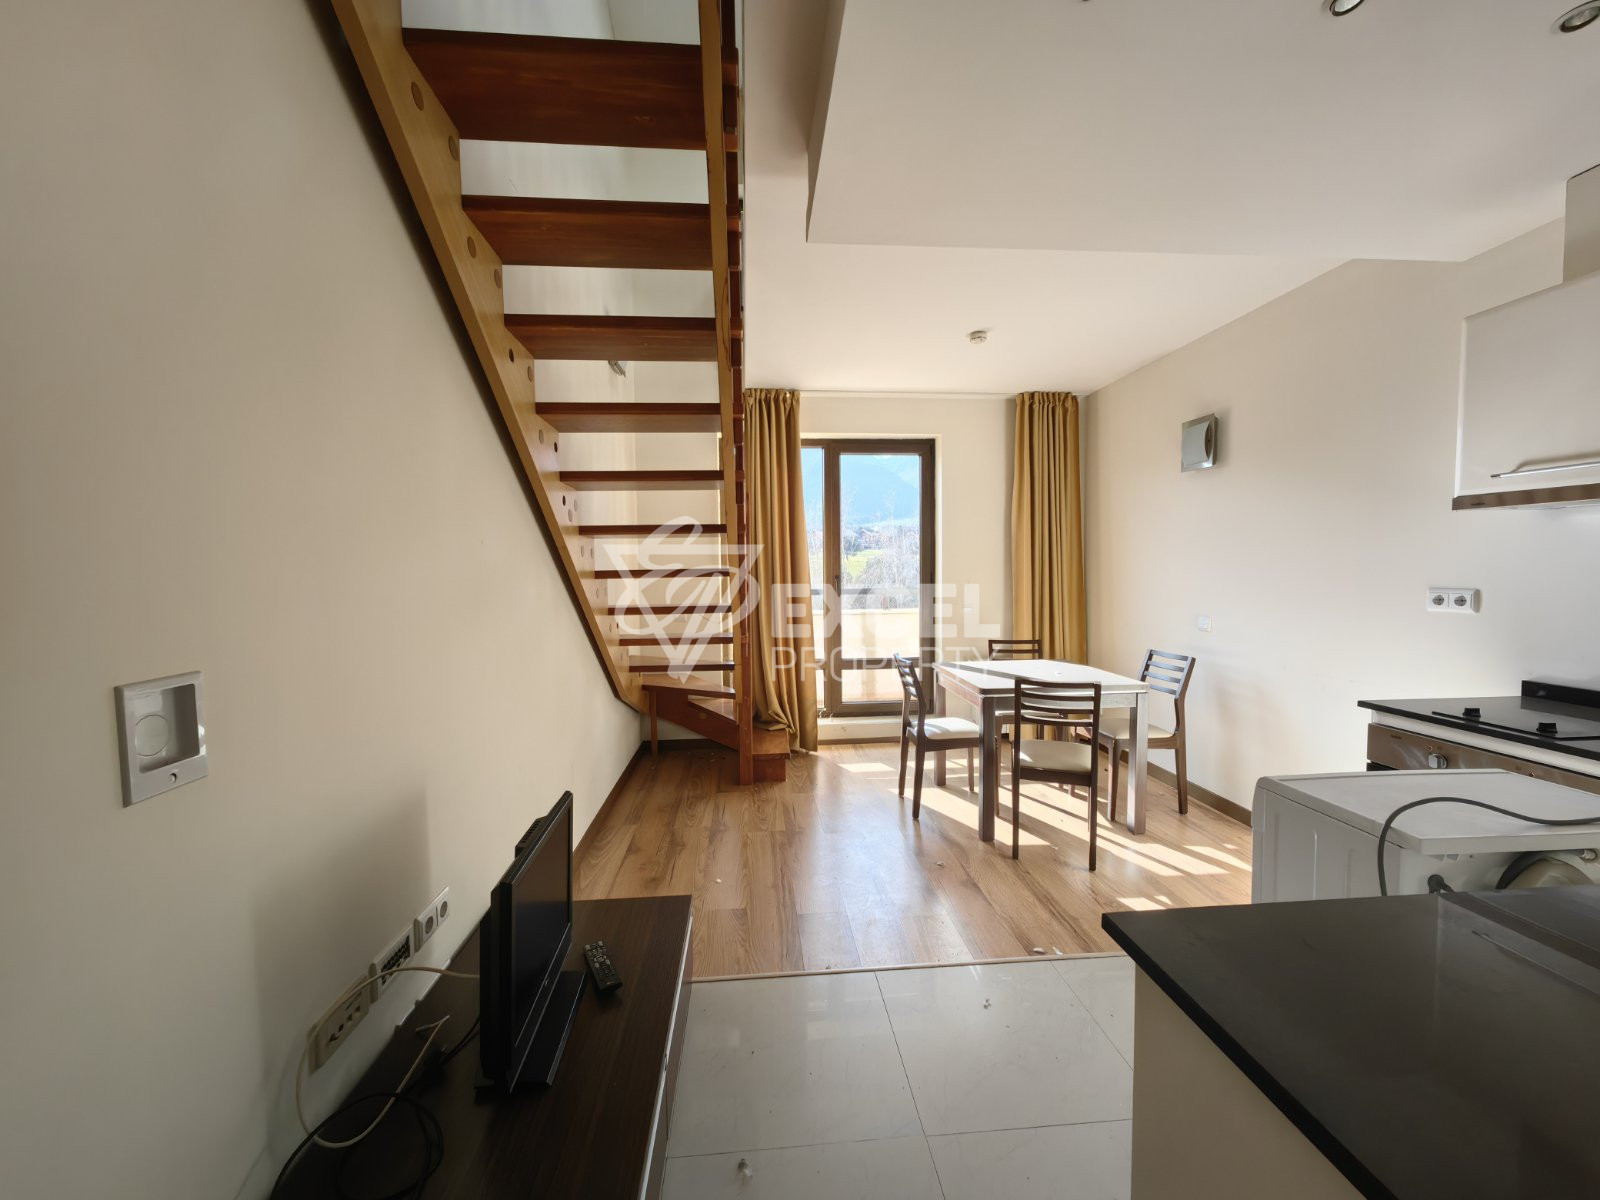 Exclusive offer for sale: Elegant southern maisonette with a panoramic view of the Pirin Mountains